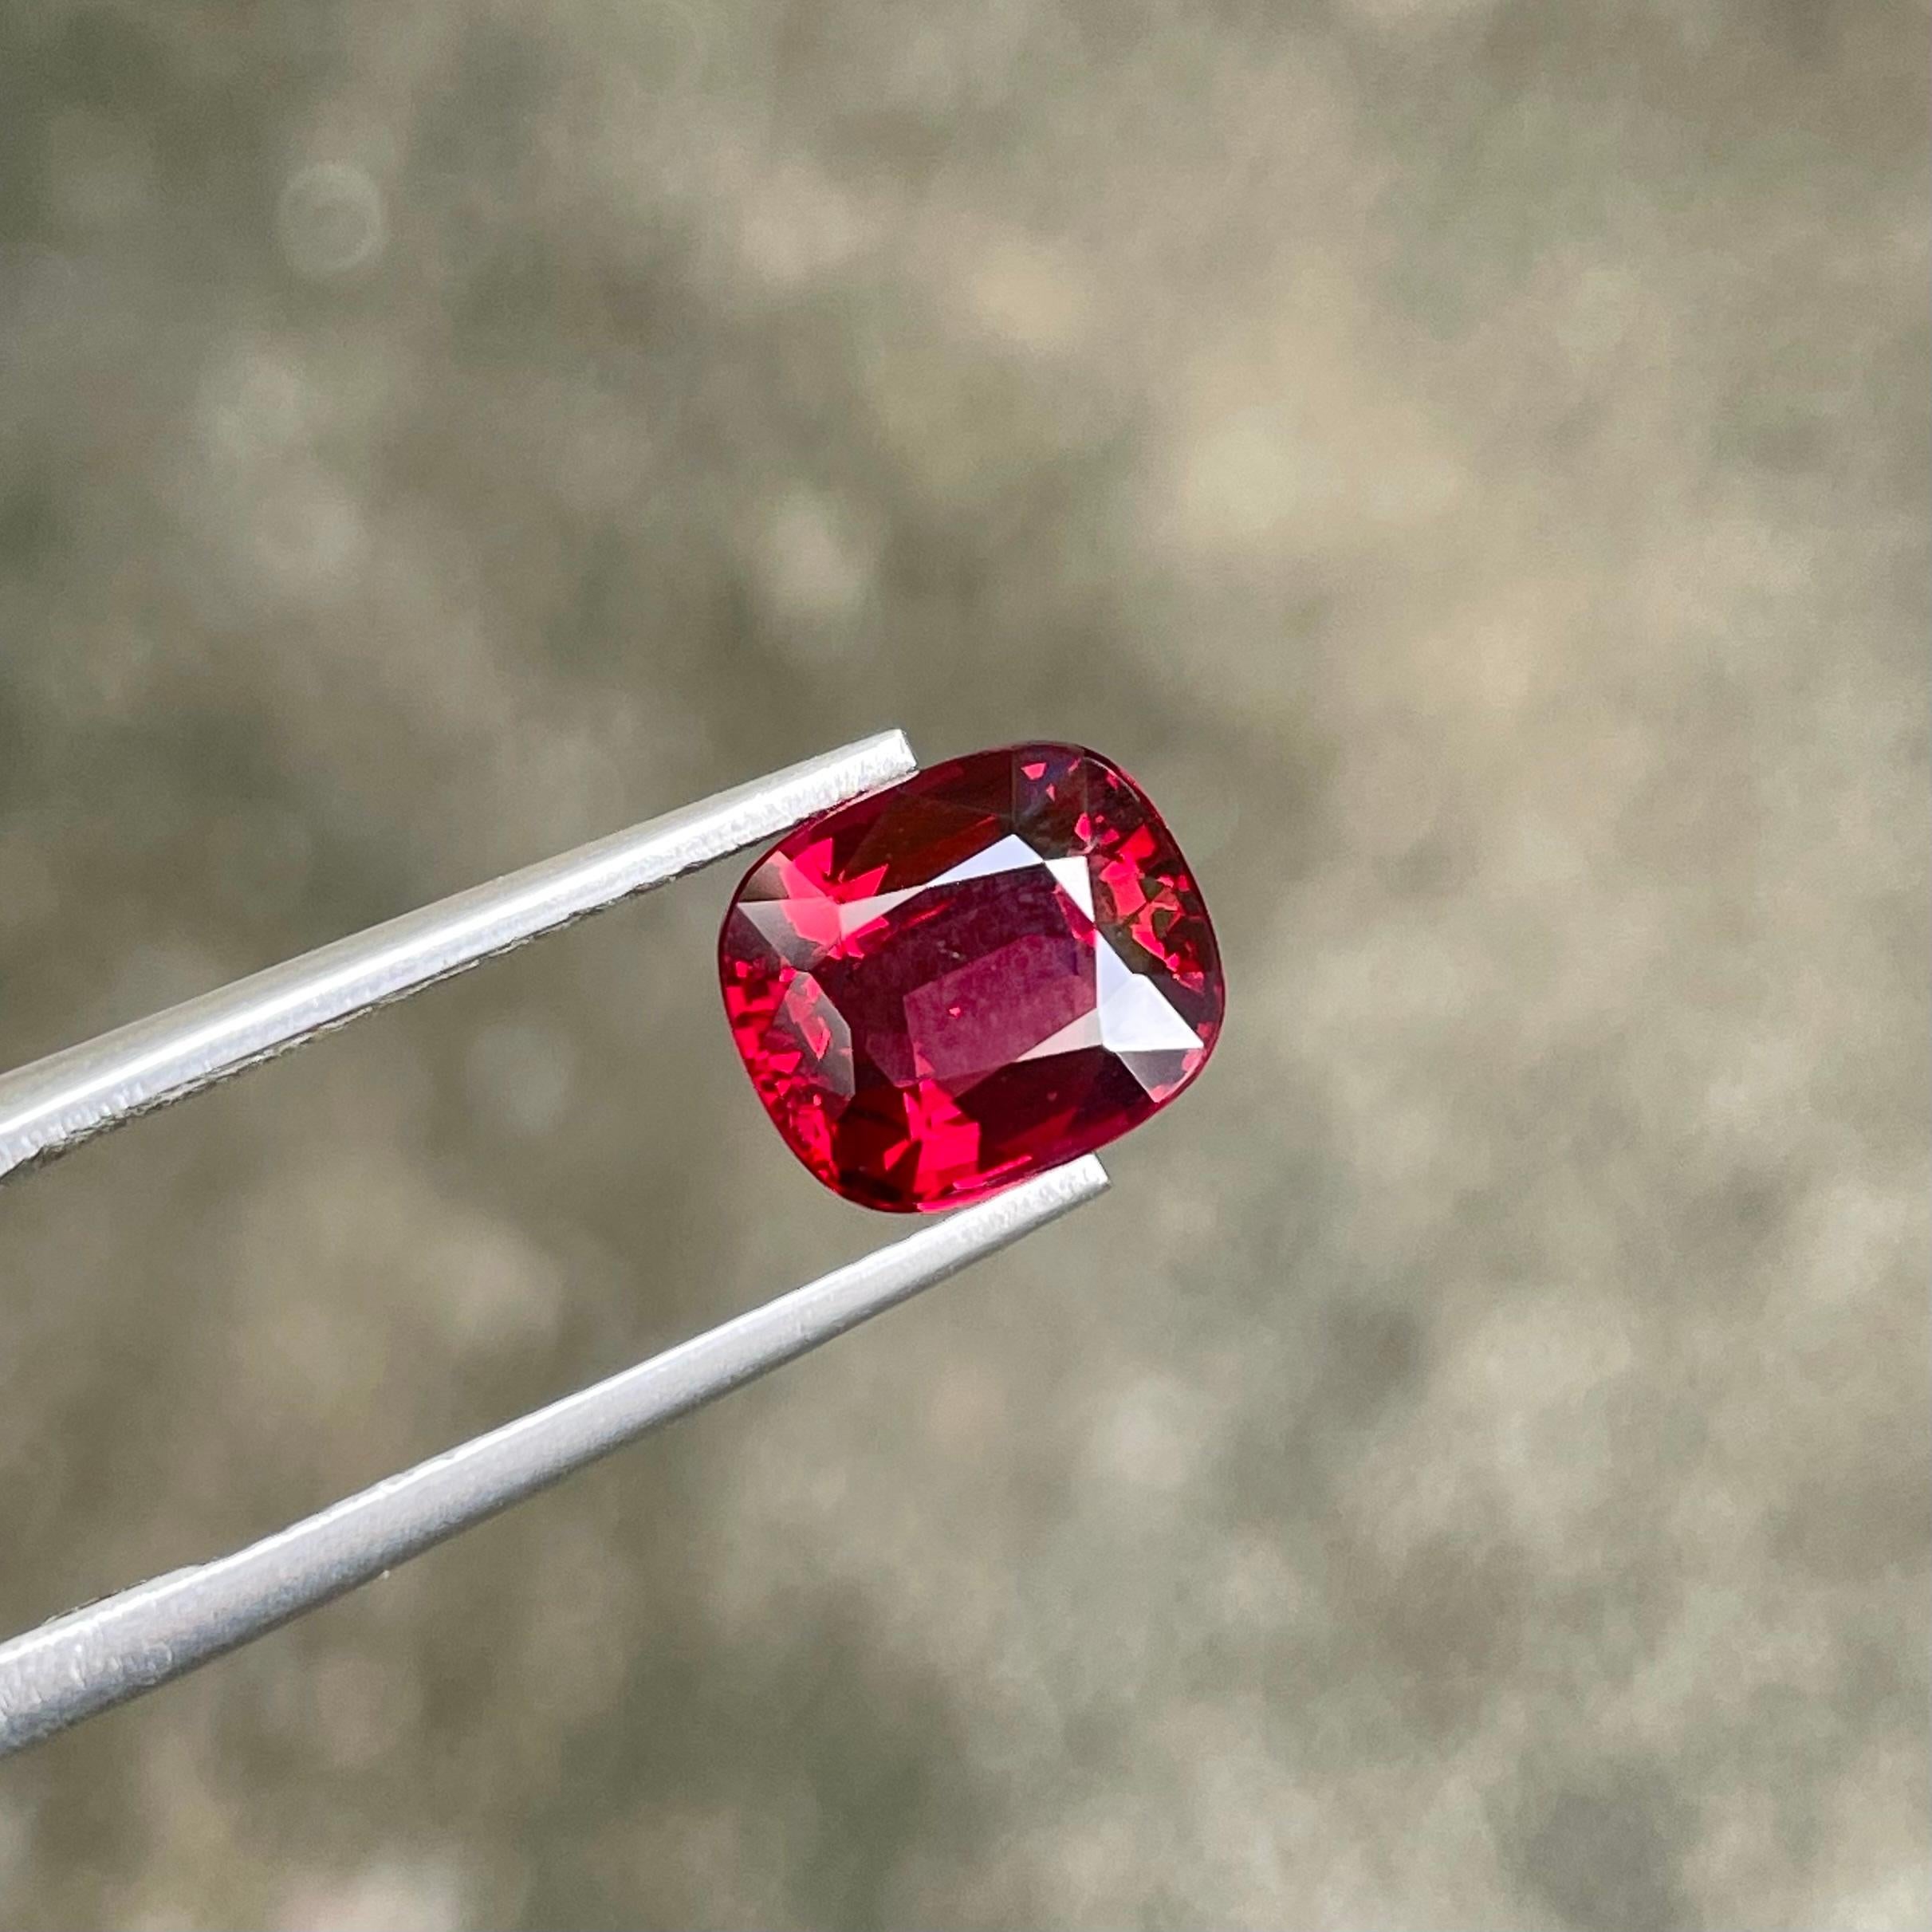 Women's or Men's Vivid Red Burmese Loose Spinel 2.70 carats Cushion Cut Natural Gemstone For Sale